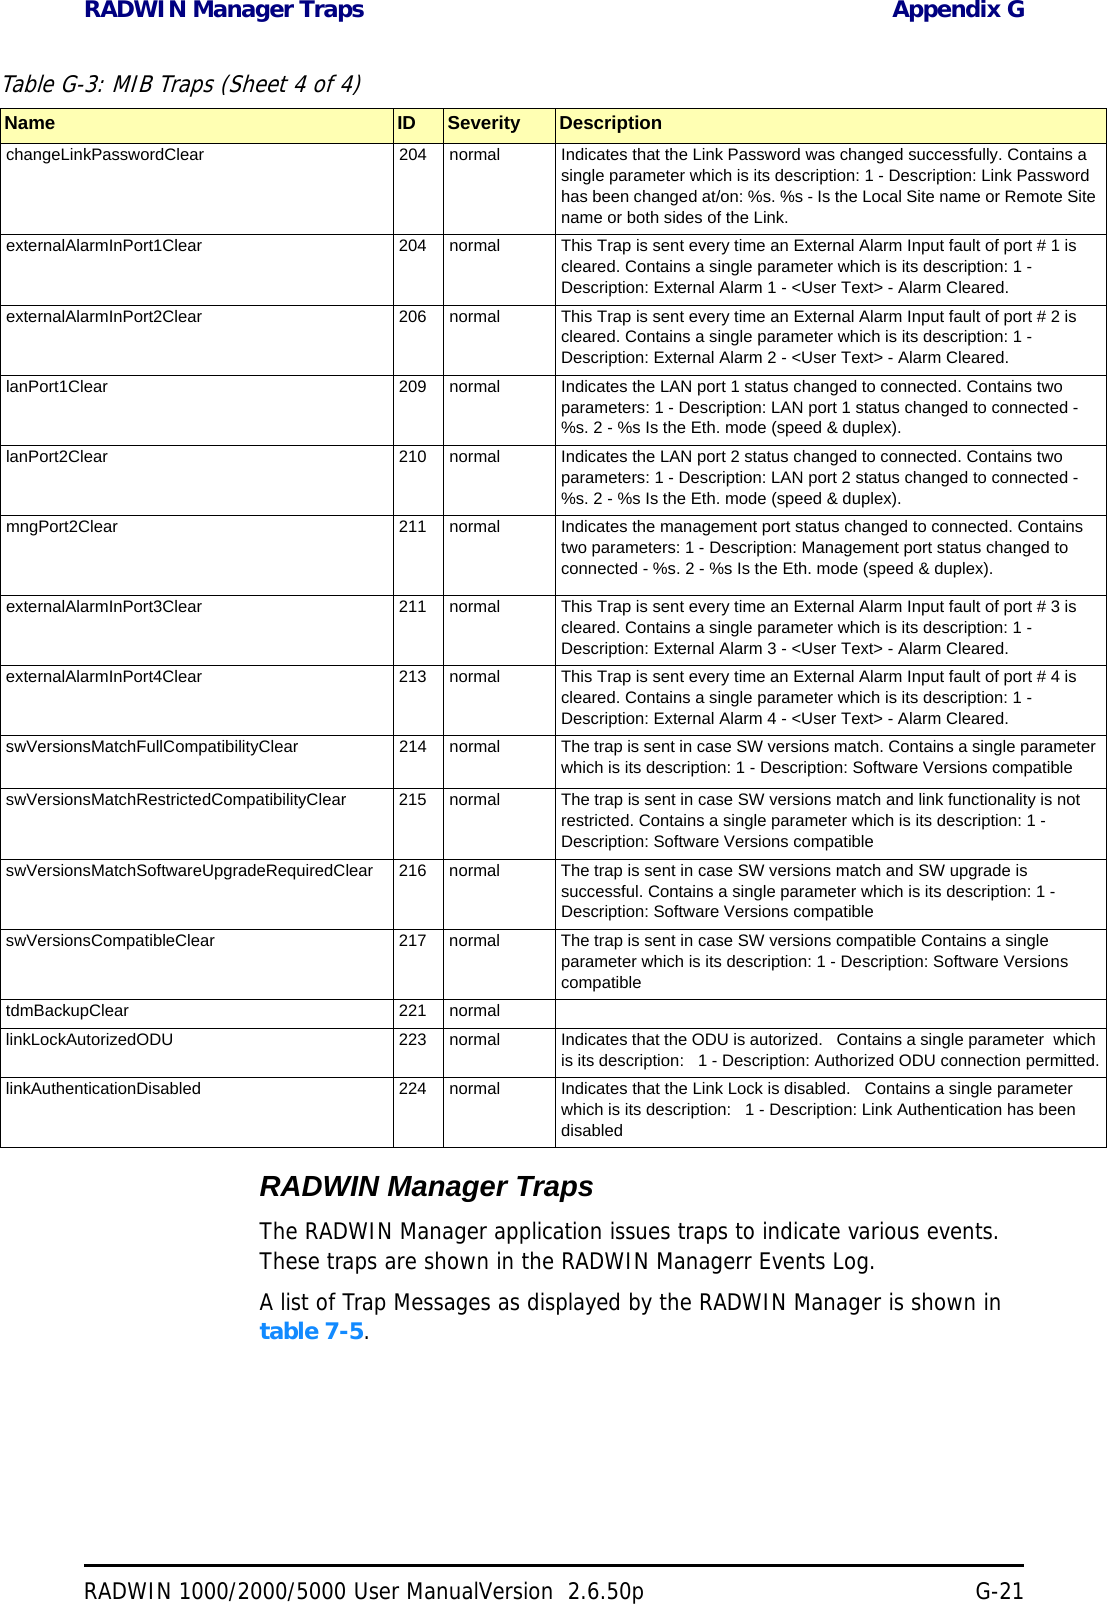 RADWIN Manager Traps Appendix GRADWIN 1000/2000/5000 User ManualVersion  2.6.50p G-21RADWIN Manager TrapsThe RADWIN Manager application issues traps to indicate various events. These traps are shown in the RADWIN Managerr Events Log.A list of Trap Messages as displayed by the RADWIN Manager is shown in table 7-5.changeLinkPasswordClear 204 normal Indicates that the Link Password was changed successfully. Contains a single parameter which is its description: 1 - Description: Link Password has been changed at/on: %s. %s - Is the Local Site name or Remote Site name or both sides of the Link. externalAlarmInPort1Clear 204 normal This Trap is sent every time an External Alarm Input fault of port # 1 is cleared. Contains a single parameter which is its description: 1 - Description: External Alarm 1 - &lt;User Text&gt; - Alarm Cleared. externalAlarmInPort2Clear 206 normal This Trap is sent every time an External Alarm Input fault of port # 2 is cleared. Contains a single parameter which is its description: 1 - Description: External Alarm 2 - &lt;User Text&gt; - Alarm Cleared. lanPort1Clear 209 normal Indicates the LAN port 1 status changed to connected. Contains two parameters: 1 - Description: LAN port 1 status changed to connected - %s. 2 - %s Is the Eth. mode (speed &amp; duplex). lanPort2Clear 210 normal Indicates the LAN port 2 status changed to connected. Contains two parameters: 1 - Description: LAN port 2 status changed to connected - %s. 2 - %s Is the Eth. mode (speed &amp; duplex). mngPort2Clear 211 normal Indicates the management port status changed to connected. Contains two parameters: 1 - Description: Management port status changed to connected - %s. 2 - %s Is the Eth. mode (speed &amp; duplex). externalAlarmInPort3Clear 211 normal This Trap is sent every time an External Alarm Input fault of port # 3 is cleared. Contains a single parameter which is its description: 1 - Description: External Alarm 3 - &lt;User Text&gt; - Alarm Cleared. externalAlarmInPort4Clear 213 normal This Trap is sent every time an External Alarm Input fault of port # 4 is cleared. Contains a single parameter which is its description: 1 - Description: External Alarm 4 - &lt;User Text&gt; - Alarm Cleared. swVersionsMatchFullCompatibilityClear 214 normal The trap is sent in case SW versions match. Contains a single parameter which is its description: 1 - Description: Software Versions compatible swVersionsMatchRestrictedCompatibilityClear 215 normal The trap is sent in case SW versions match and link functionality is not restricted. Contains a single parameter which is its description: 1 - Description: Software Versions compatible swVersionsMatchSoftwareUpgradeRequiredClear 216 normal The trap is sent in case SW versions match and SW upgrade is successful. Contains a single parameter which is its description: 1 - Description: Software Versions compatible swVersionsCompatibleClear 217 normal The trap is sent in case SW versions compatible Contains a single parameter which is its description: 1 - Description: Software Versions compatible tdmBackupClear 221 normallinkLockAutorizedODU 223 normal Indicates that the ODU is autorized.  Contains a single parameter  which is its description:  1 - Description: Authorized ODU connection permitted.linkAuthenticationDisabled 224 normal Indicates that the Link Lock is disabled.  Contains a single parameter  which is its description:  1 - Description: Link Authentication has been disabledTable G-3: MIB Traps (Sheet 4 of 4)Name ID Severity Description